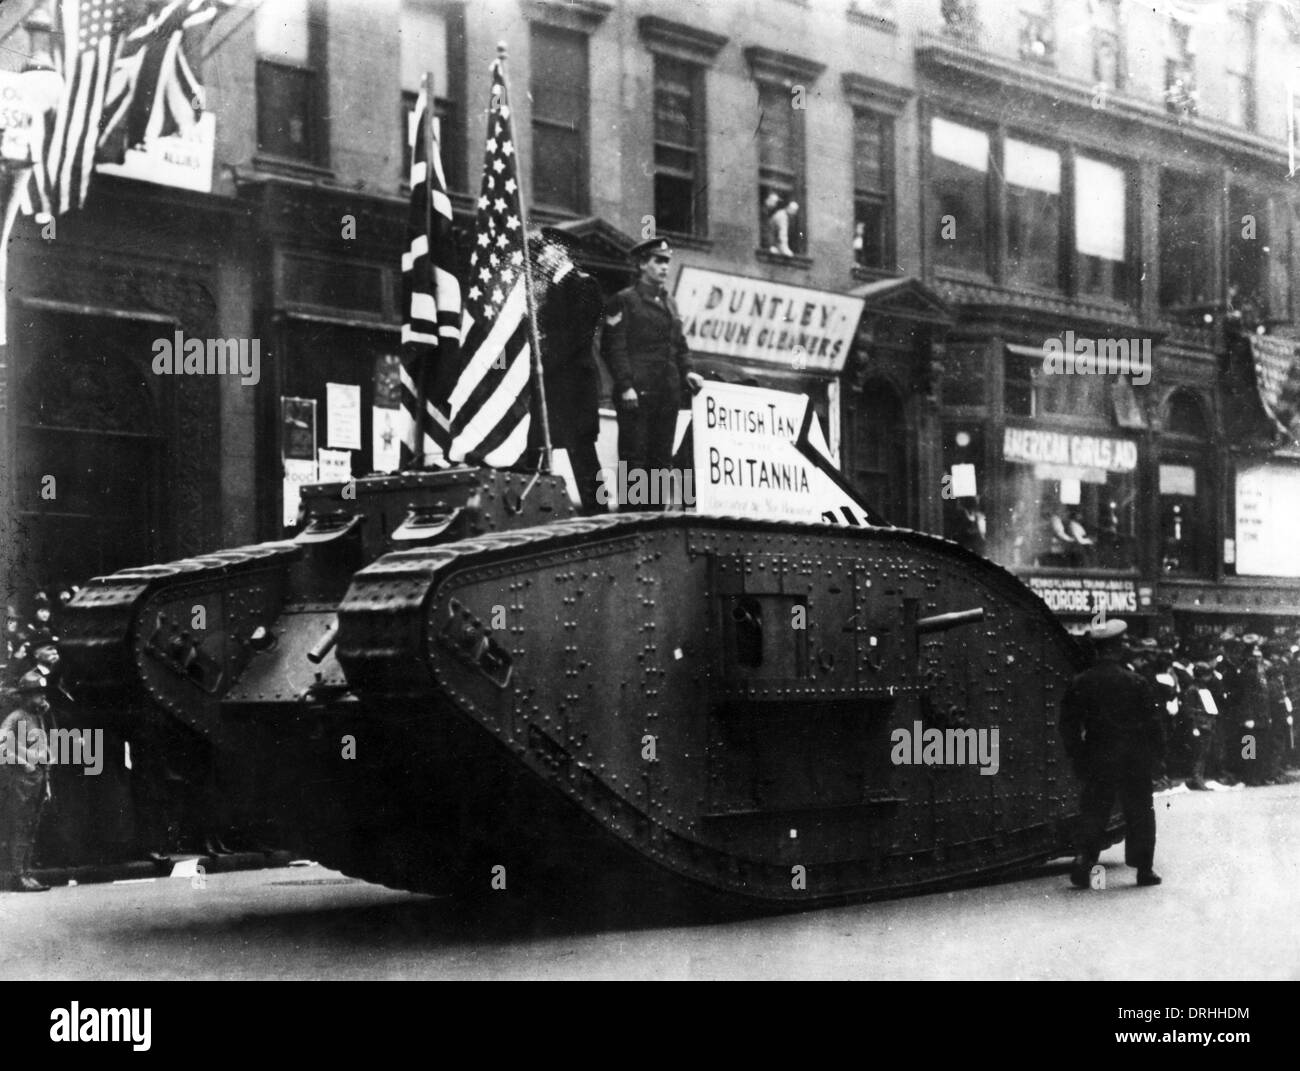 British and American soldiers on a tank, WW1 Stock Photo